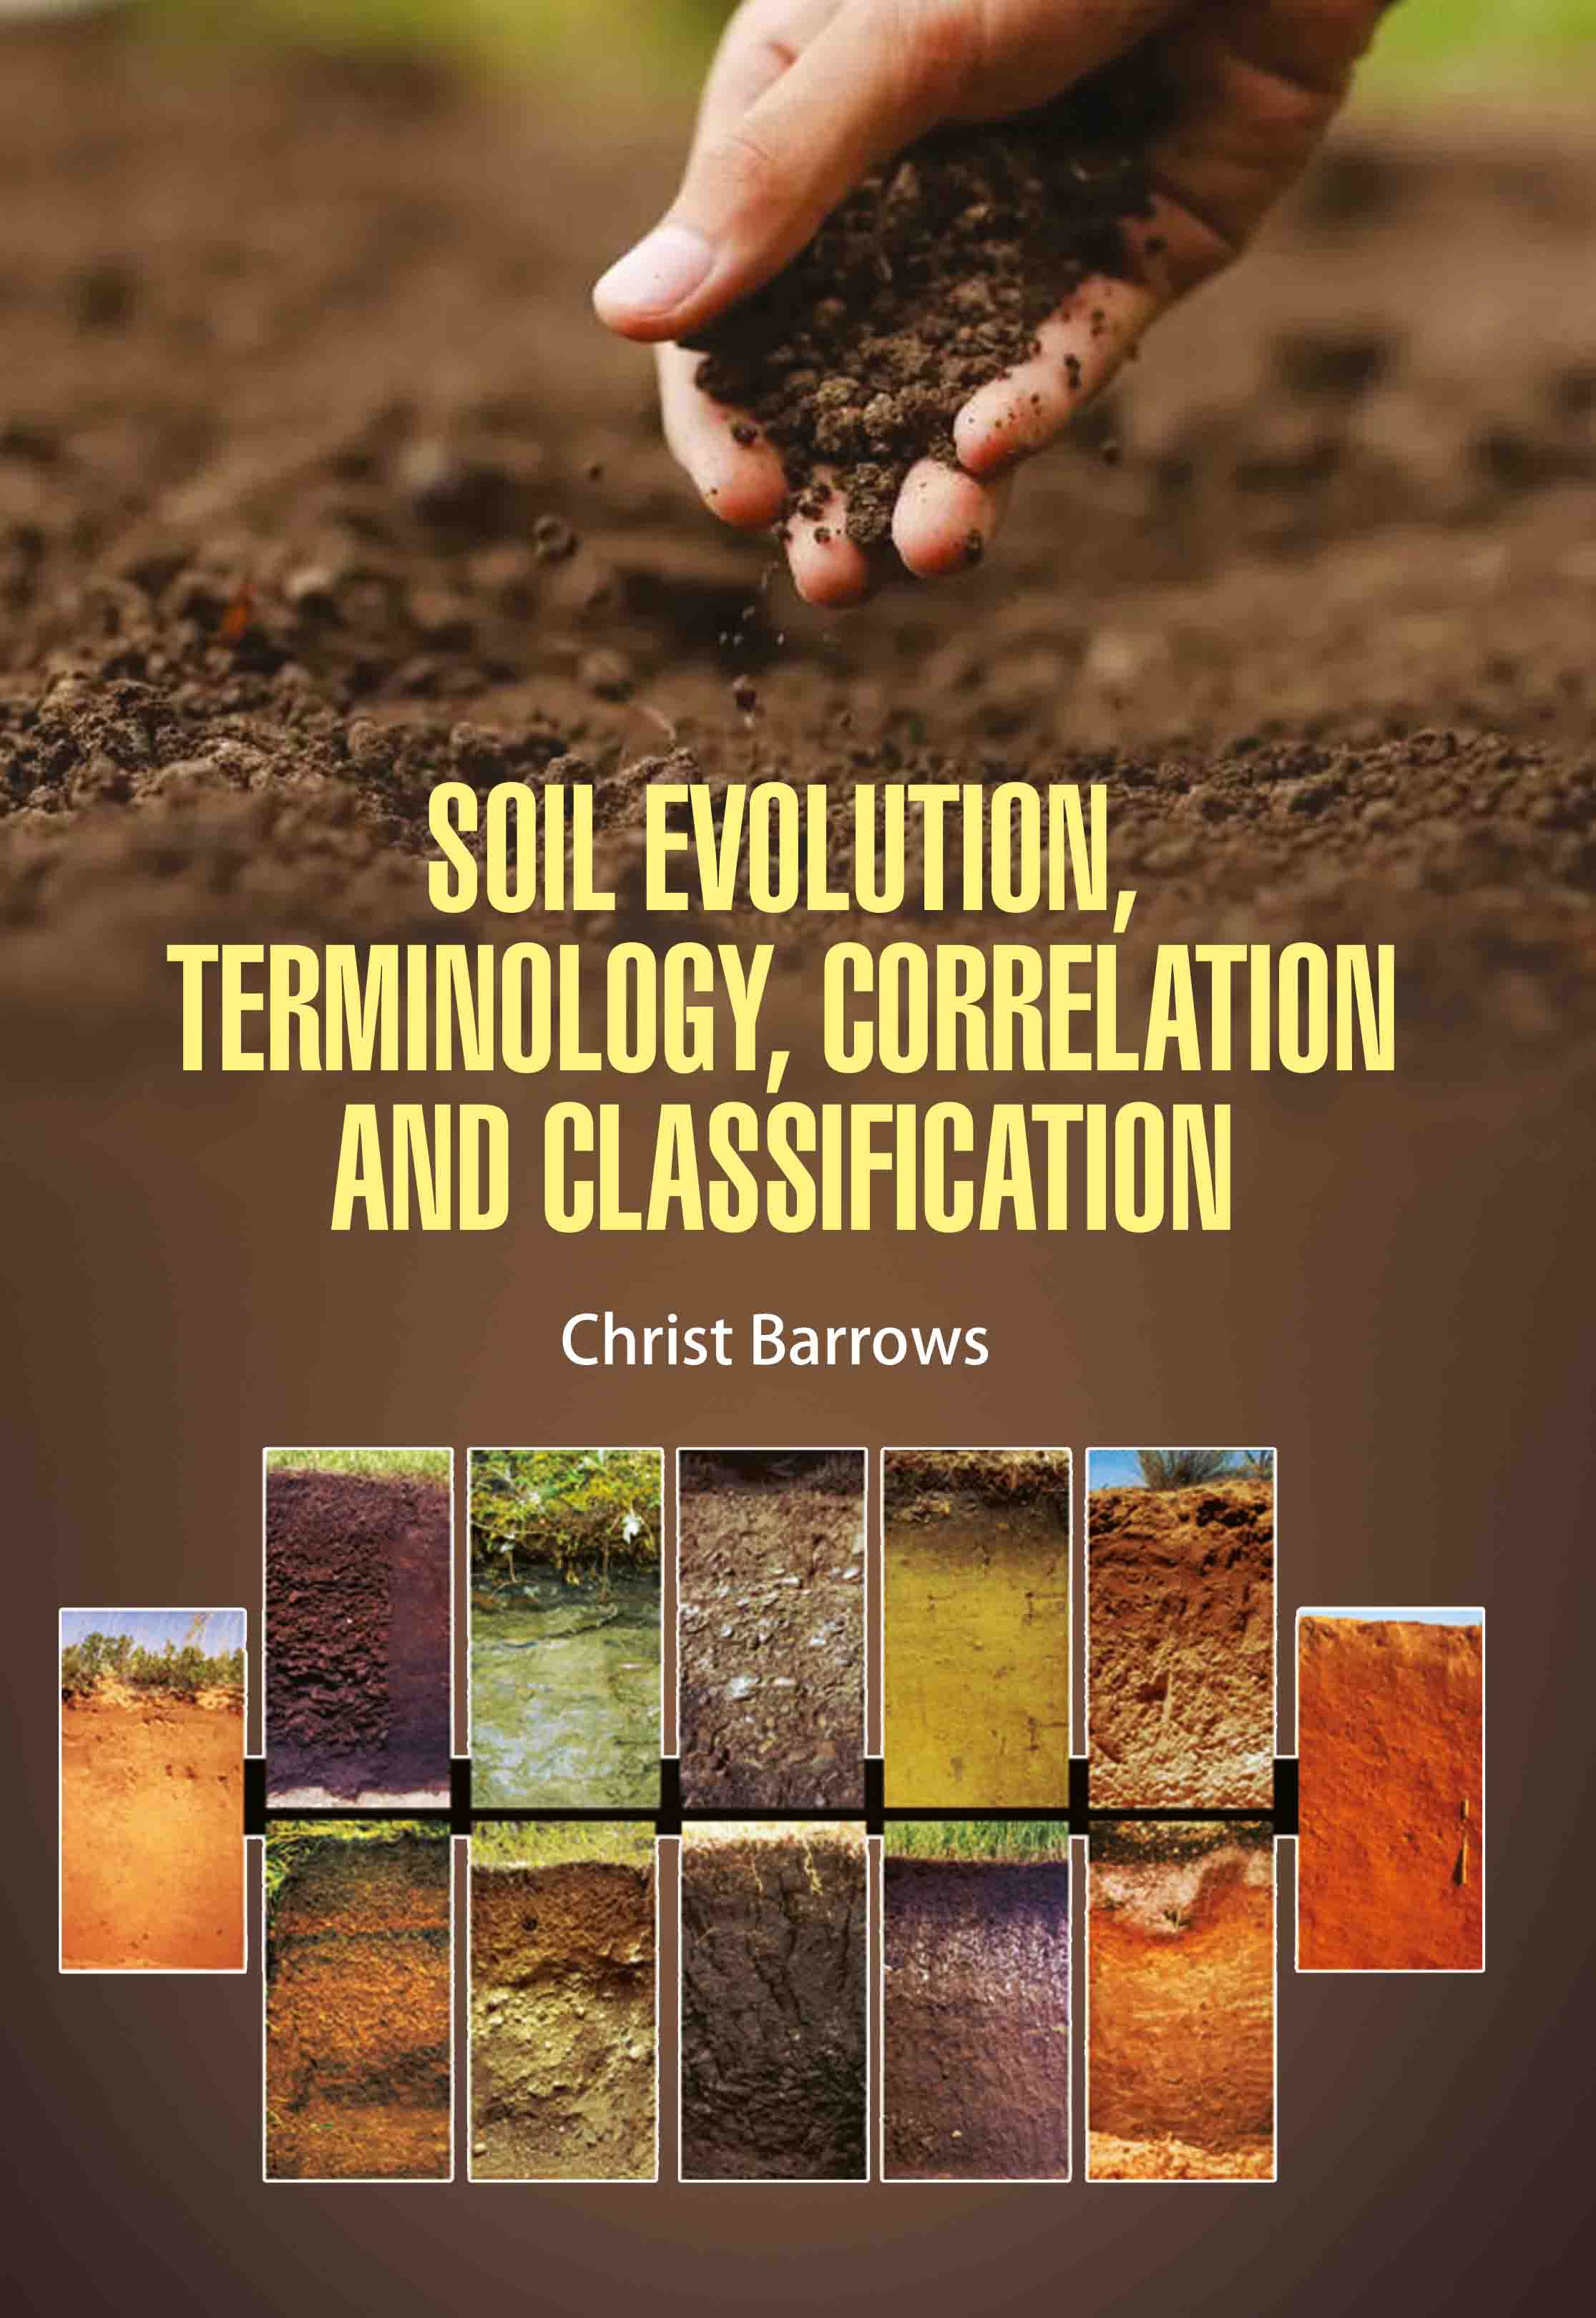 Soil Evolution, Terminology, Correlation and Classification